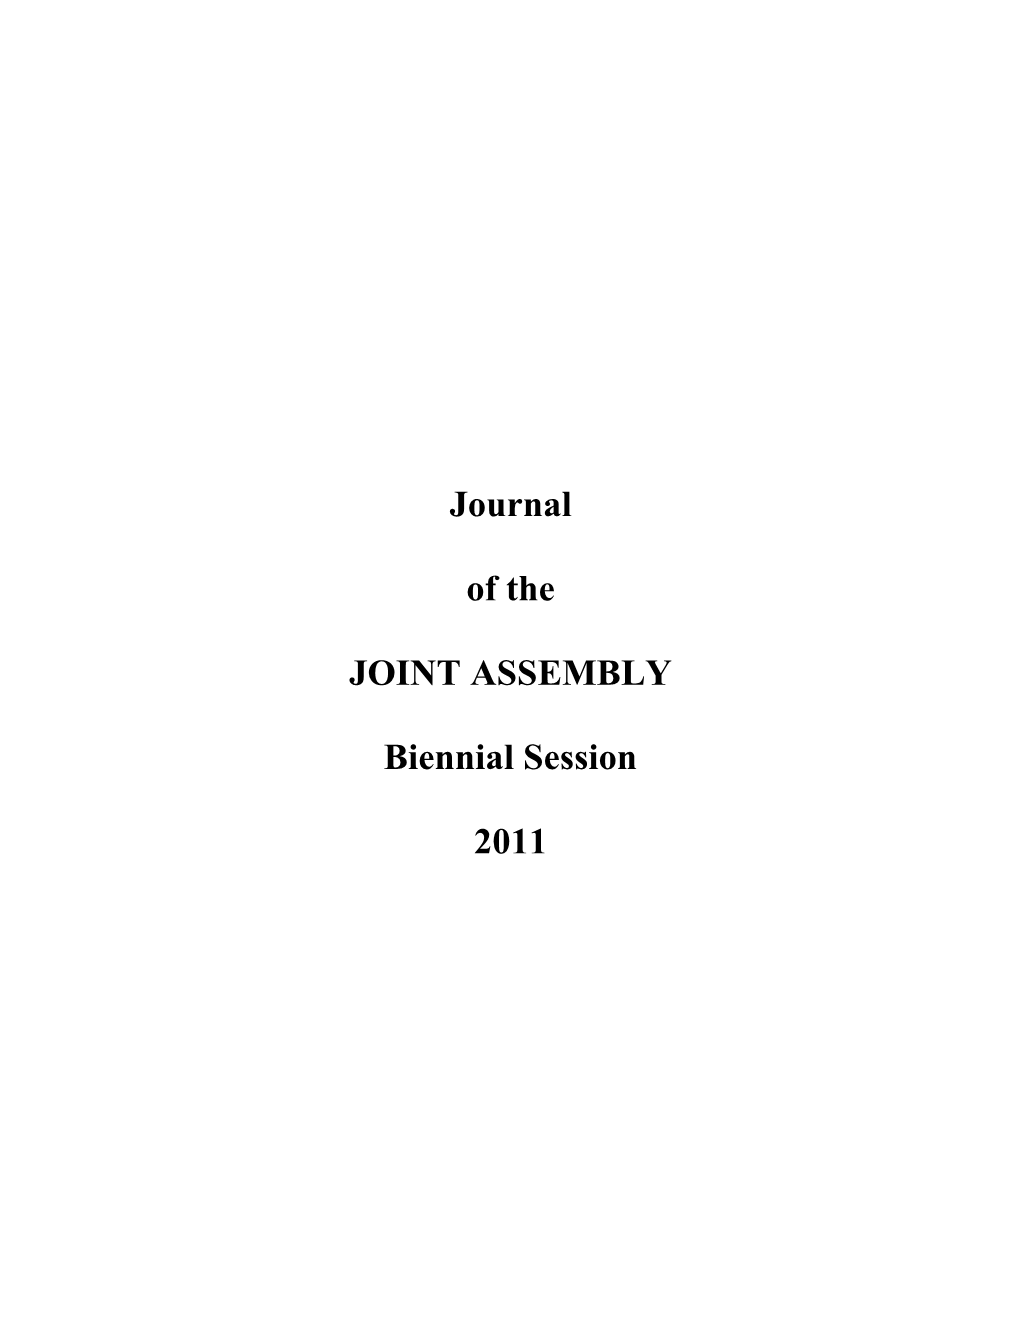 Journal of the Joint Assembly of the State of Vermont Biennial Session, 2011 ______In Joint Assembly, January 5, 2011 2:00 P.M